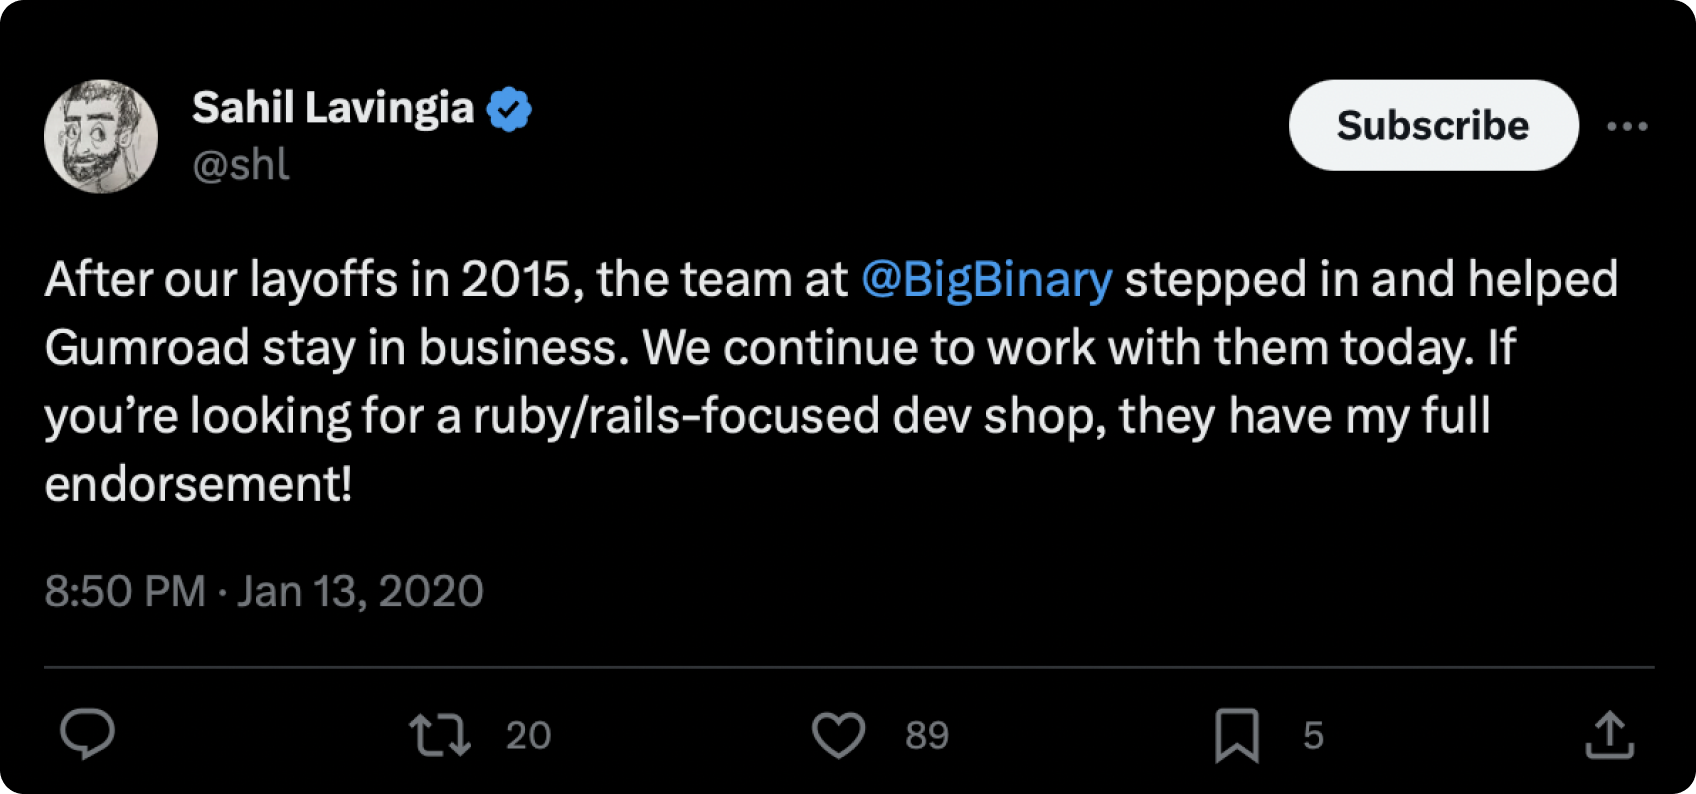 Praise for BigBinary